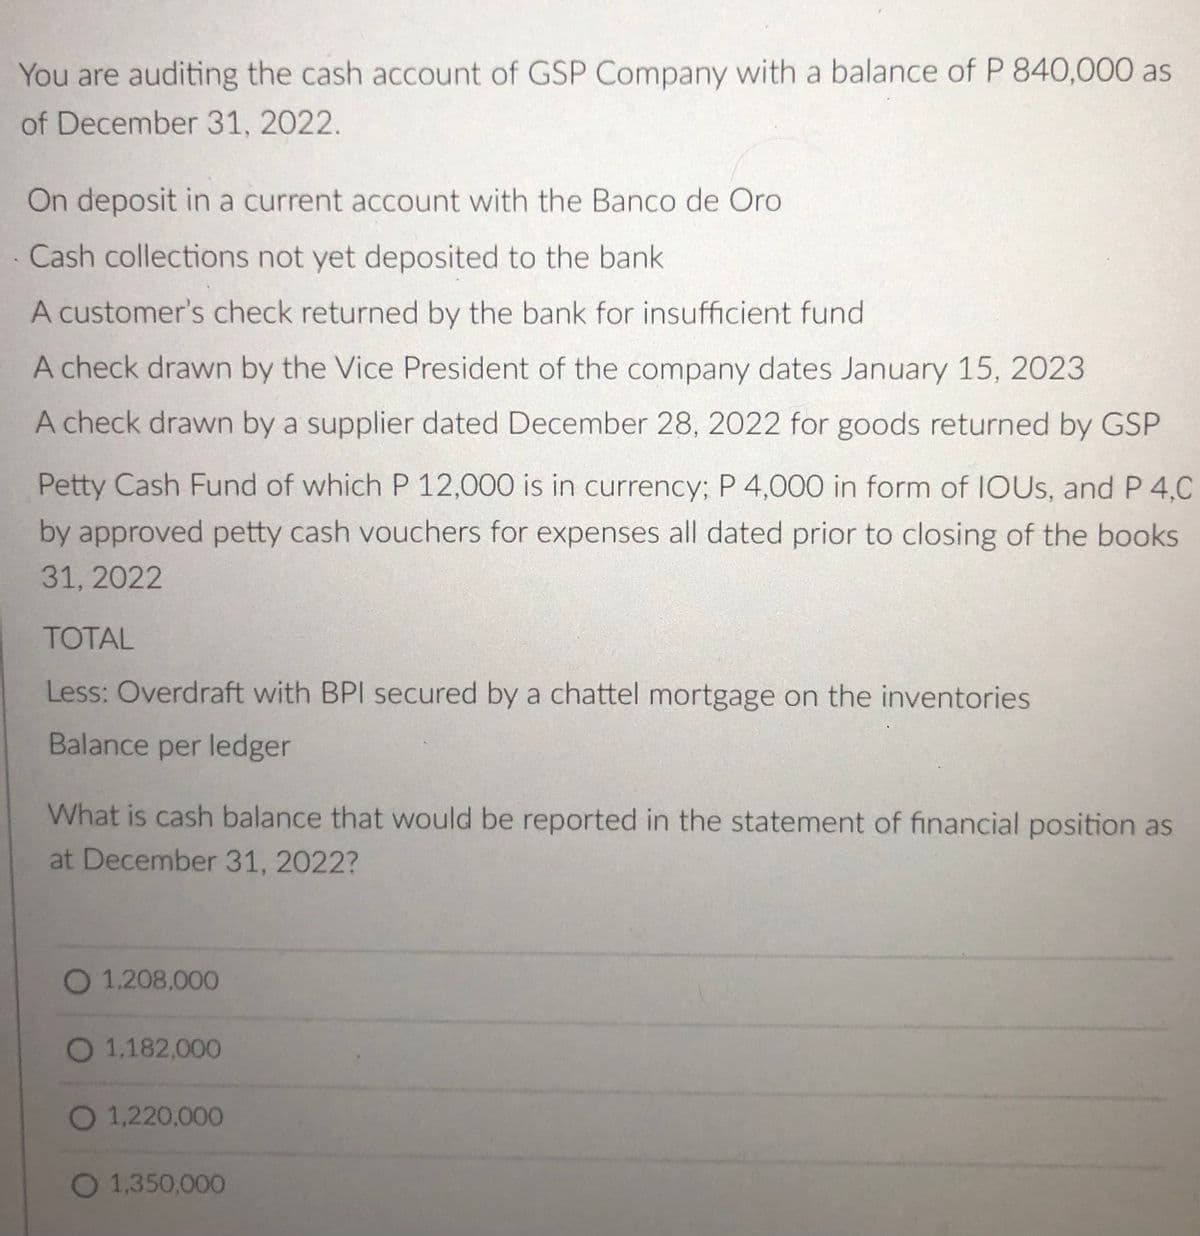 You are auditing the cash account of GSP Company with a balance of P 840,000 as
of December 31, 2022.
On deposit in a current account with the Banco de Oro
Cash collections not yet deposited to the bank
A customer's check returned by the bank for insufficient fund
A check drawn by the Vice President of the company dates January 15, 2023
A check drawn by a supplier dated December 28, 2022 for goods returned by GSP
Petty Cash Fund of which P 12,000 is in currency; P 4,000 in form of IOUS, and P 4,0
by approved petty cash vouchers for expenses all dated prior to closing of the books
31, 2022
TOTAL
Less: Overdraft with BPI secured by a chattel mortgage on the inventories
Balance per ledger
What is cash balance that would be reported in the statement of financial position as
at December 31, 2022?
O 1,208,000
O 1,182,000
O 1,220,000
O 1,350,000
